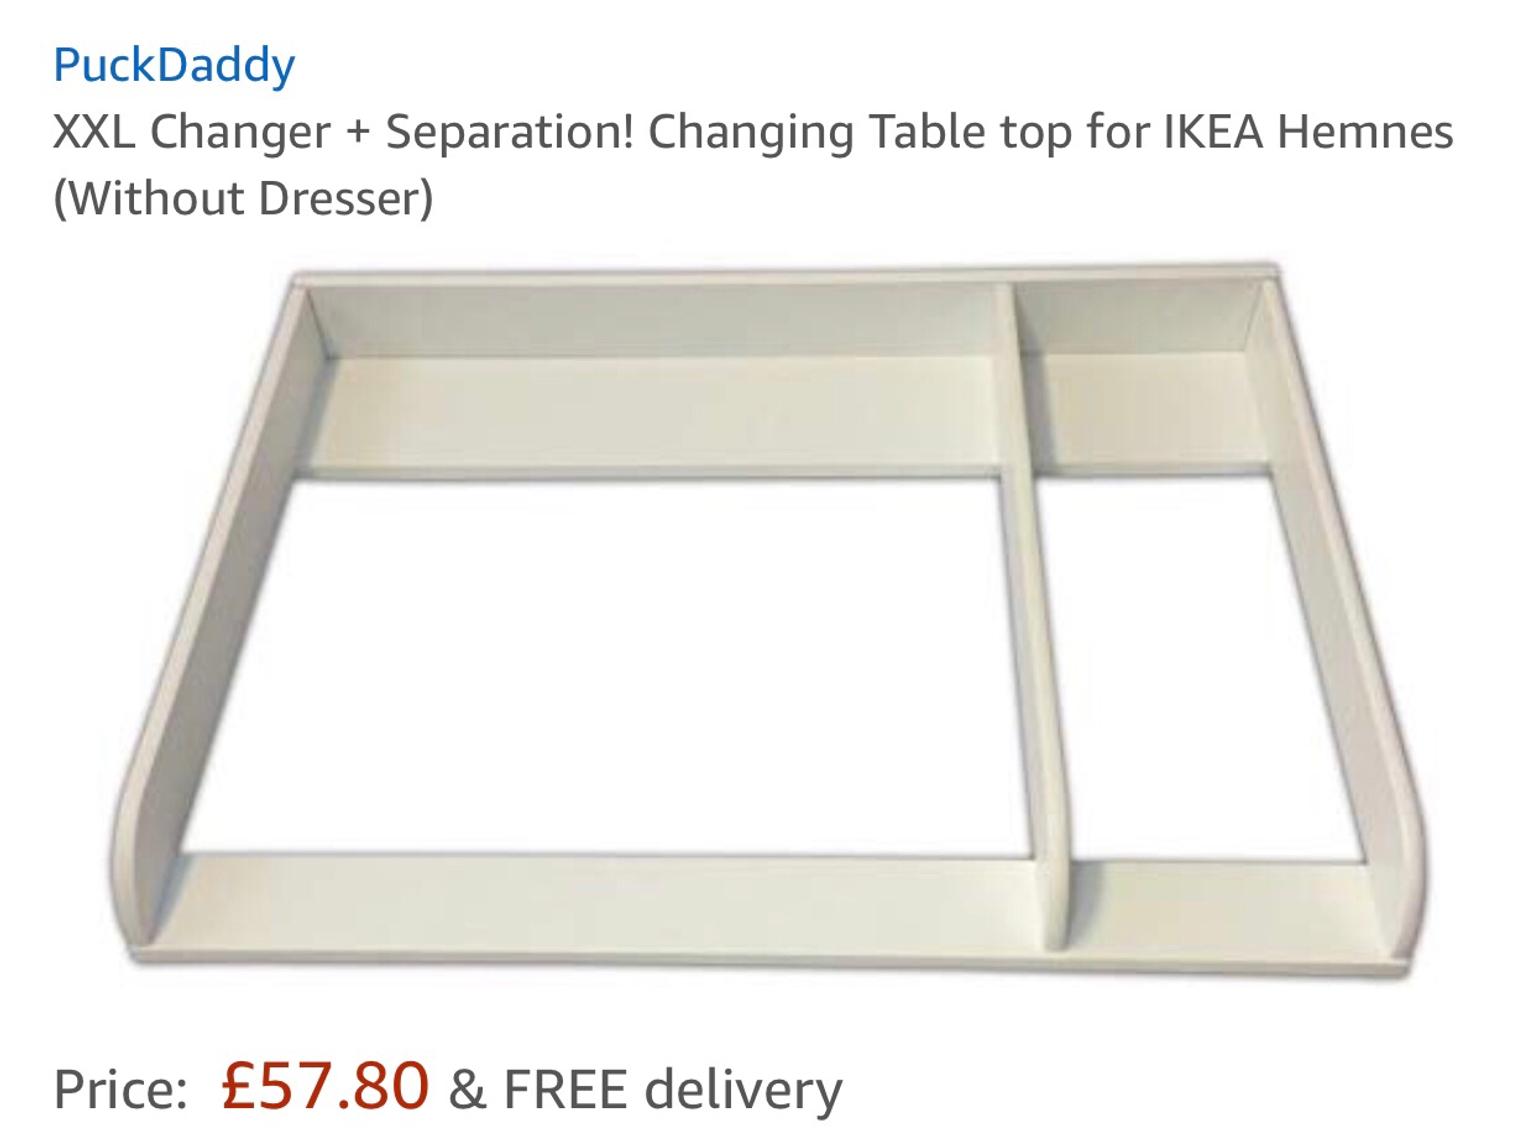 Changing Table Top For Ikea Hemnes Separation Without Dresser Xxl